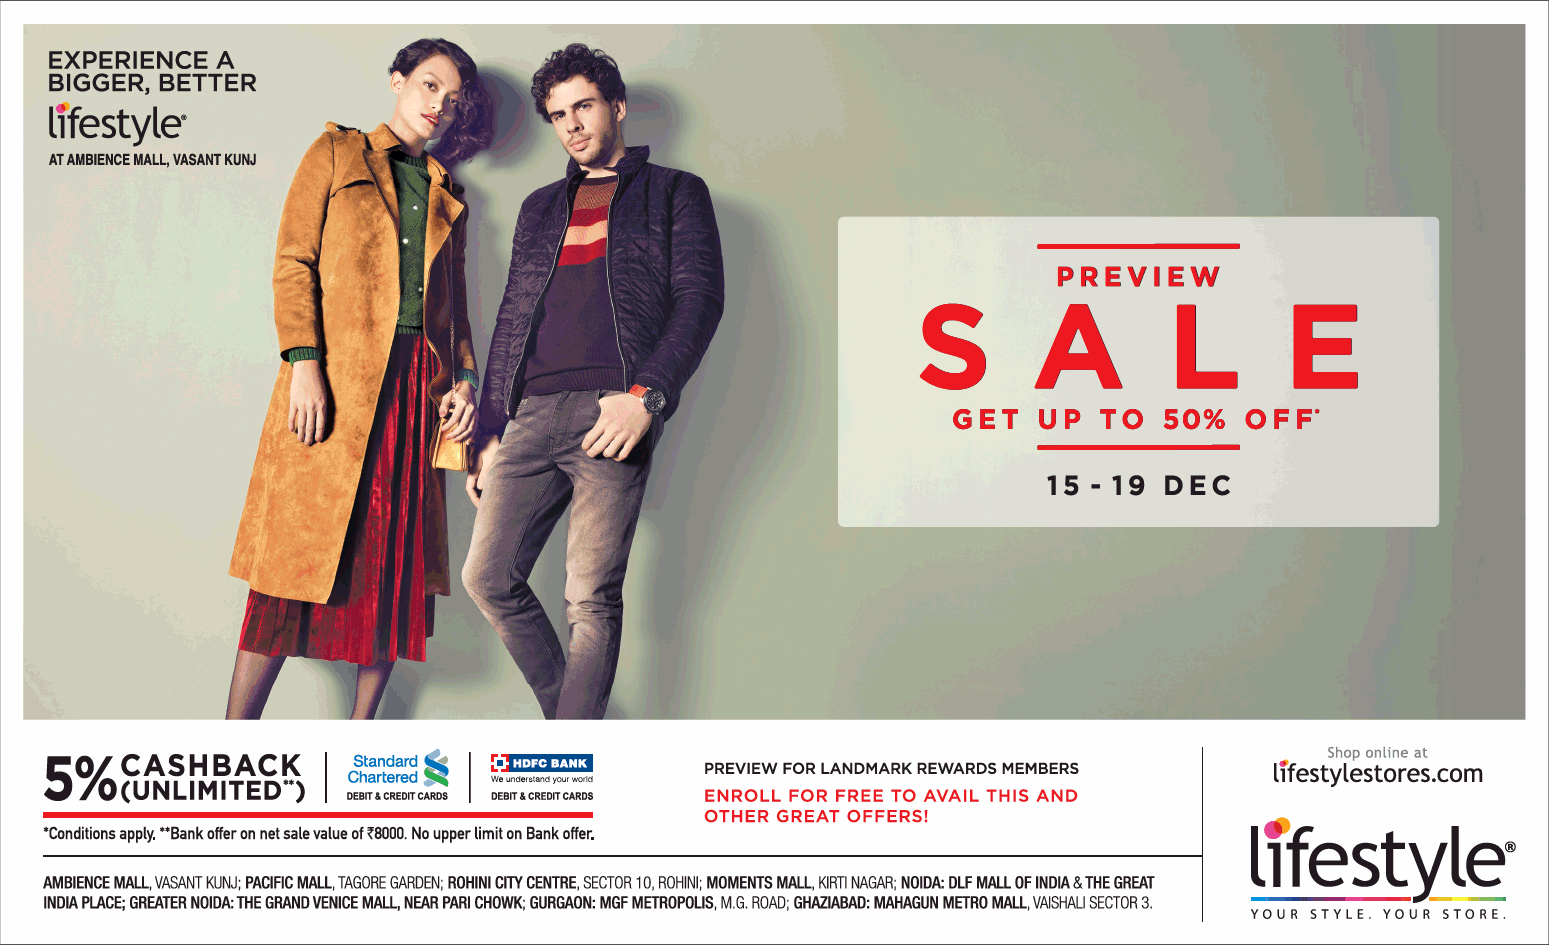 lifestyle-preview-sale-gt-upto-50%-off-ad-times-of-india-delhi-16-12-2018.png